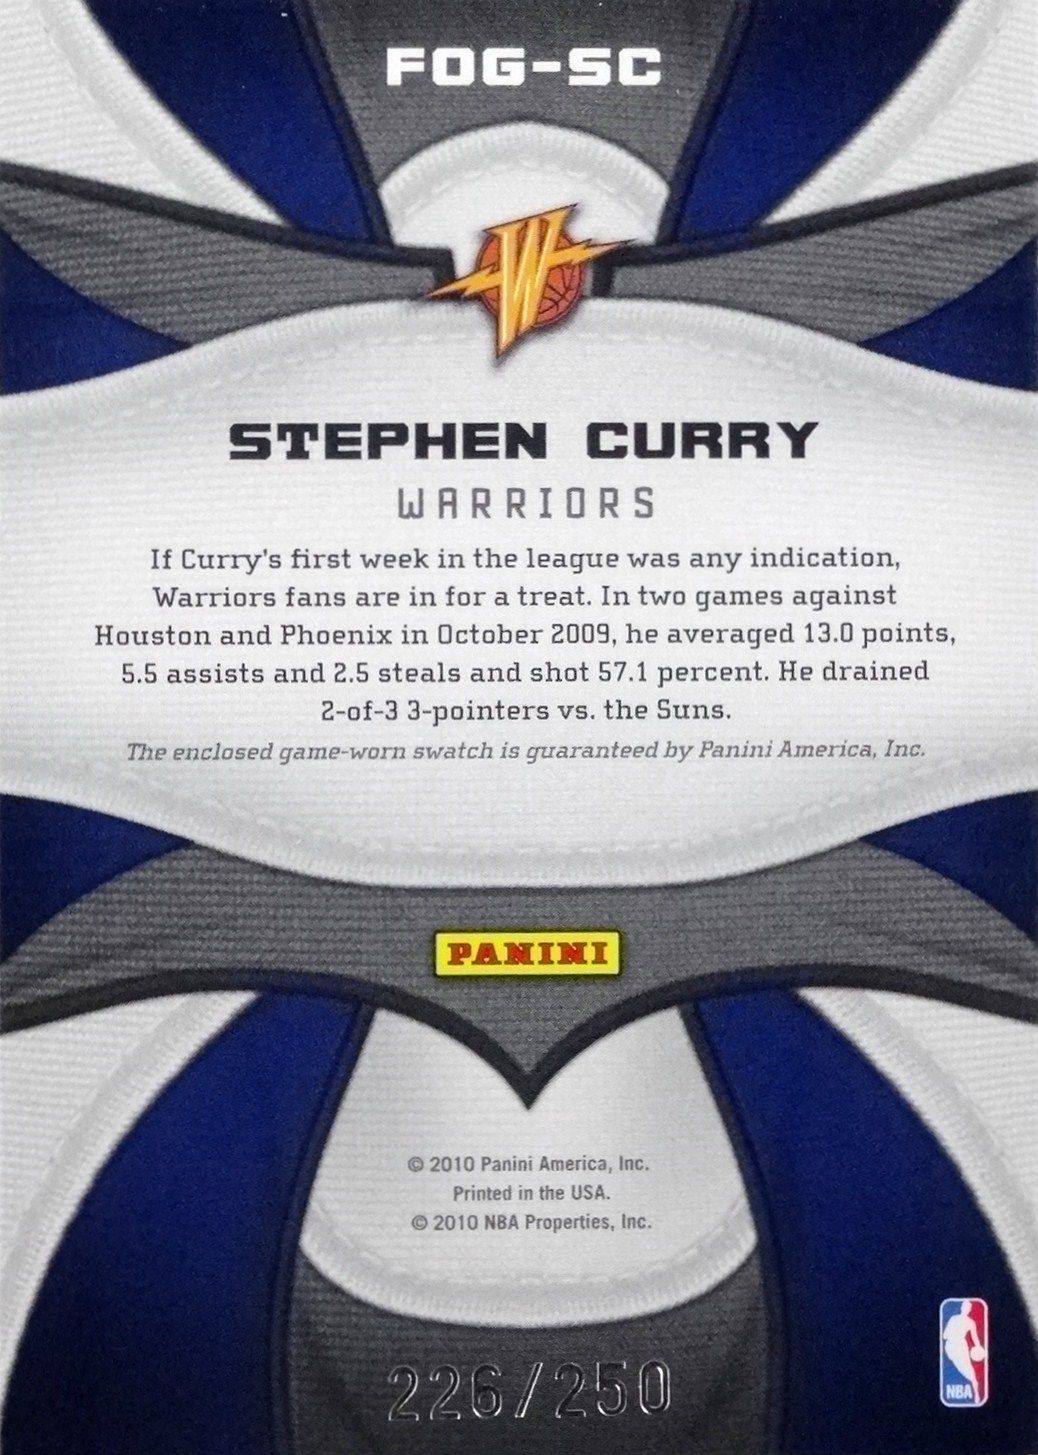 2009-10 Certified Fabric of the Game #FOG-SC Stephen Curry 250 - Back.JPG